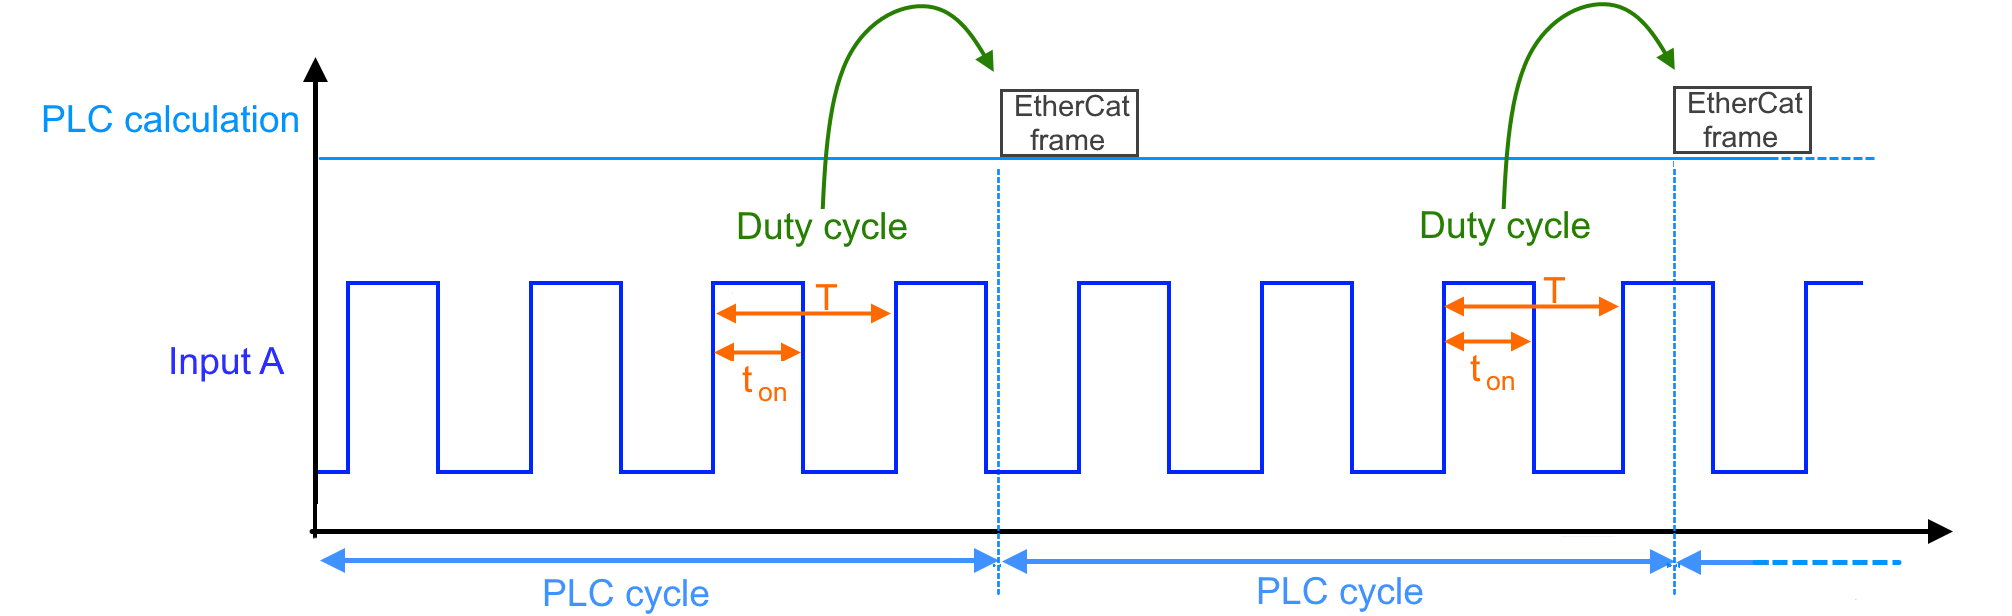 Duty cycle evaluation 1: